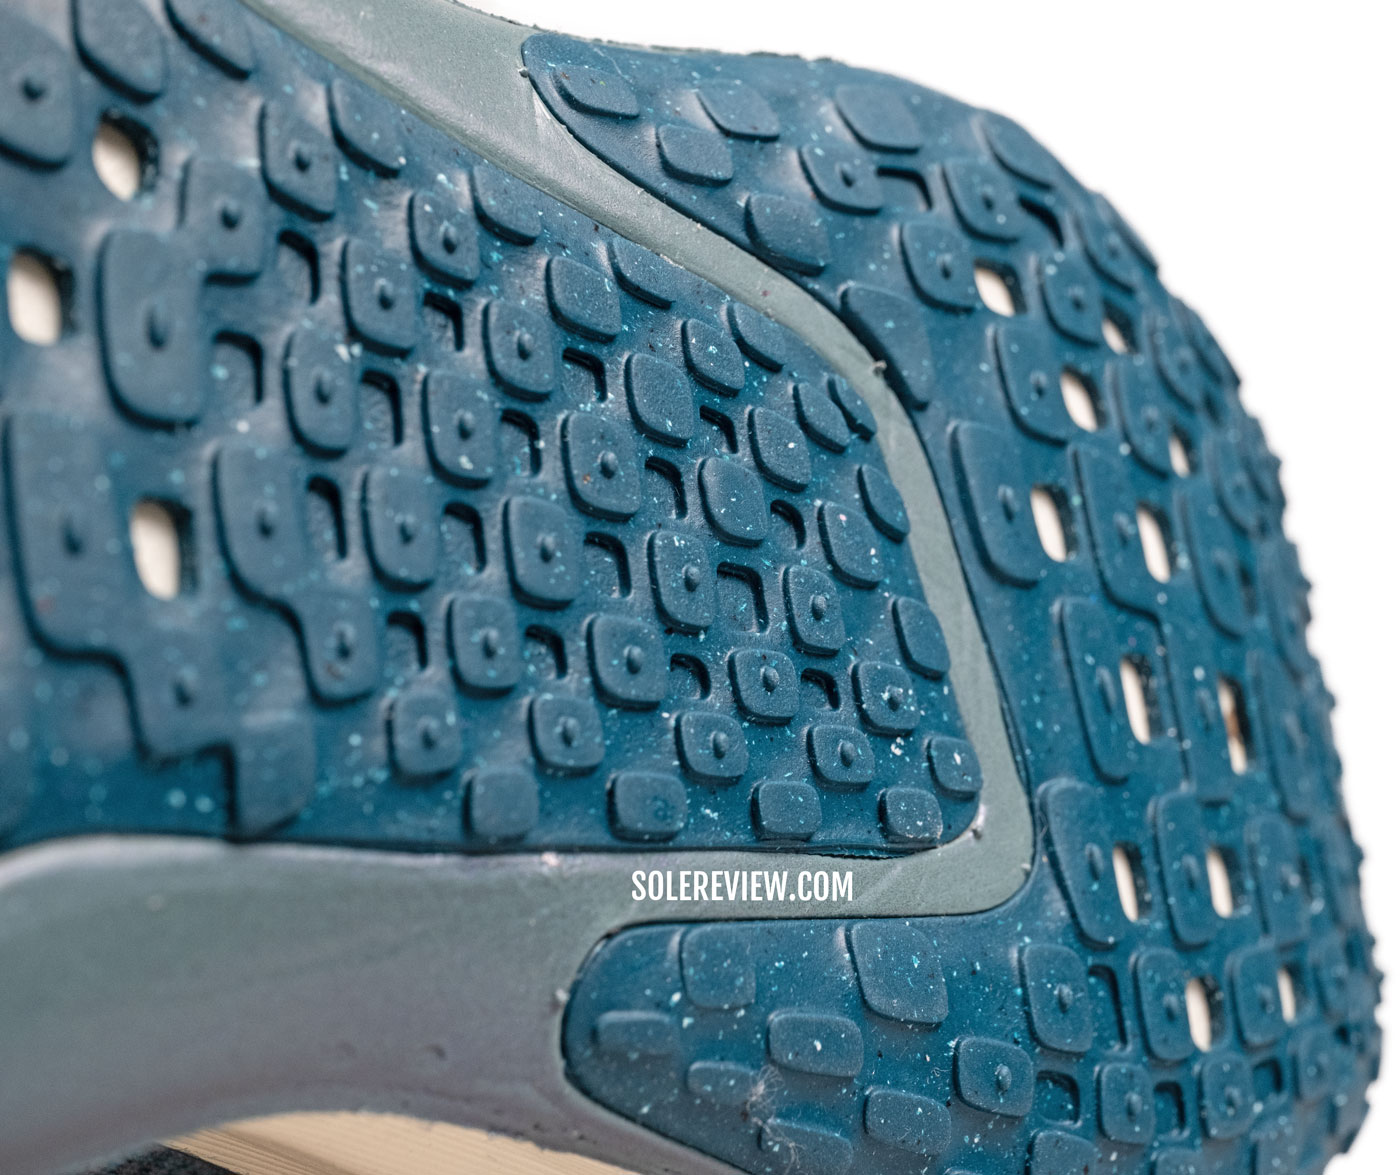 The rearfoot outsole of the Nike ZoomX Invincible Run 3.